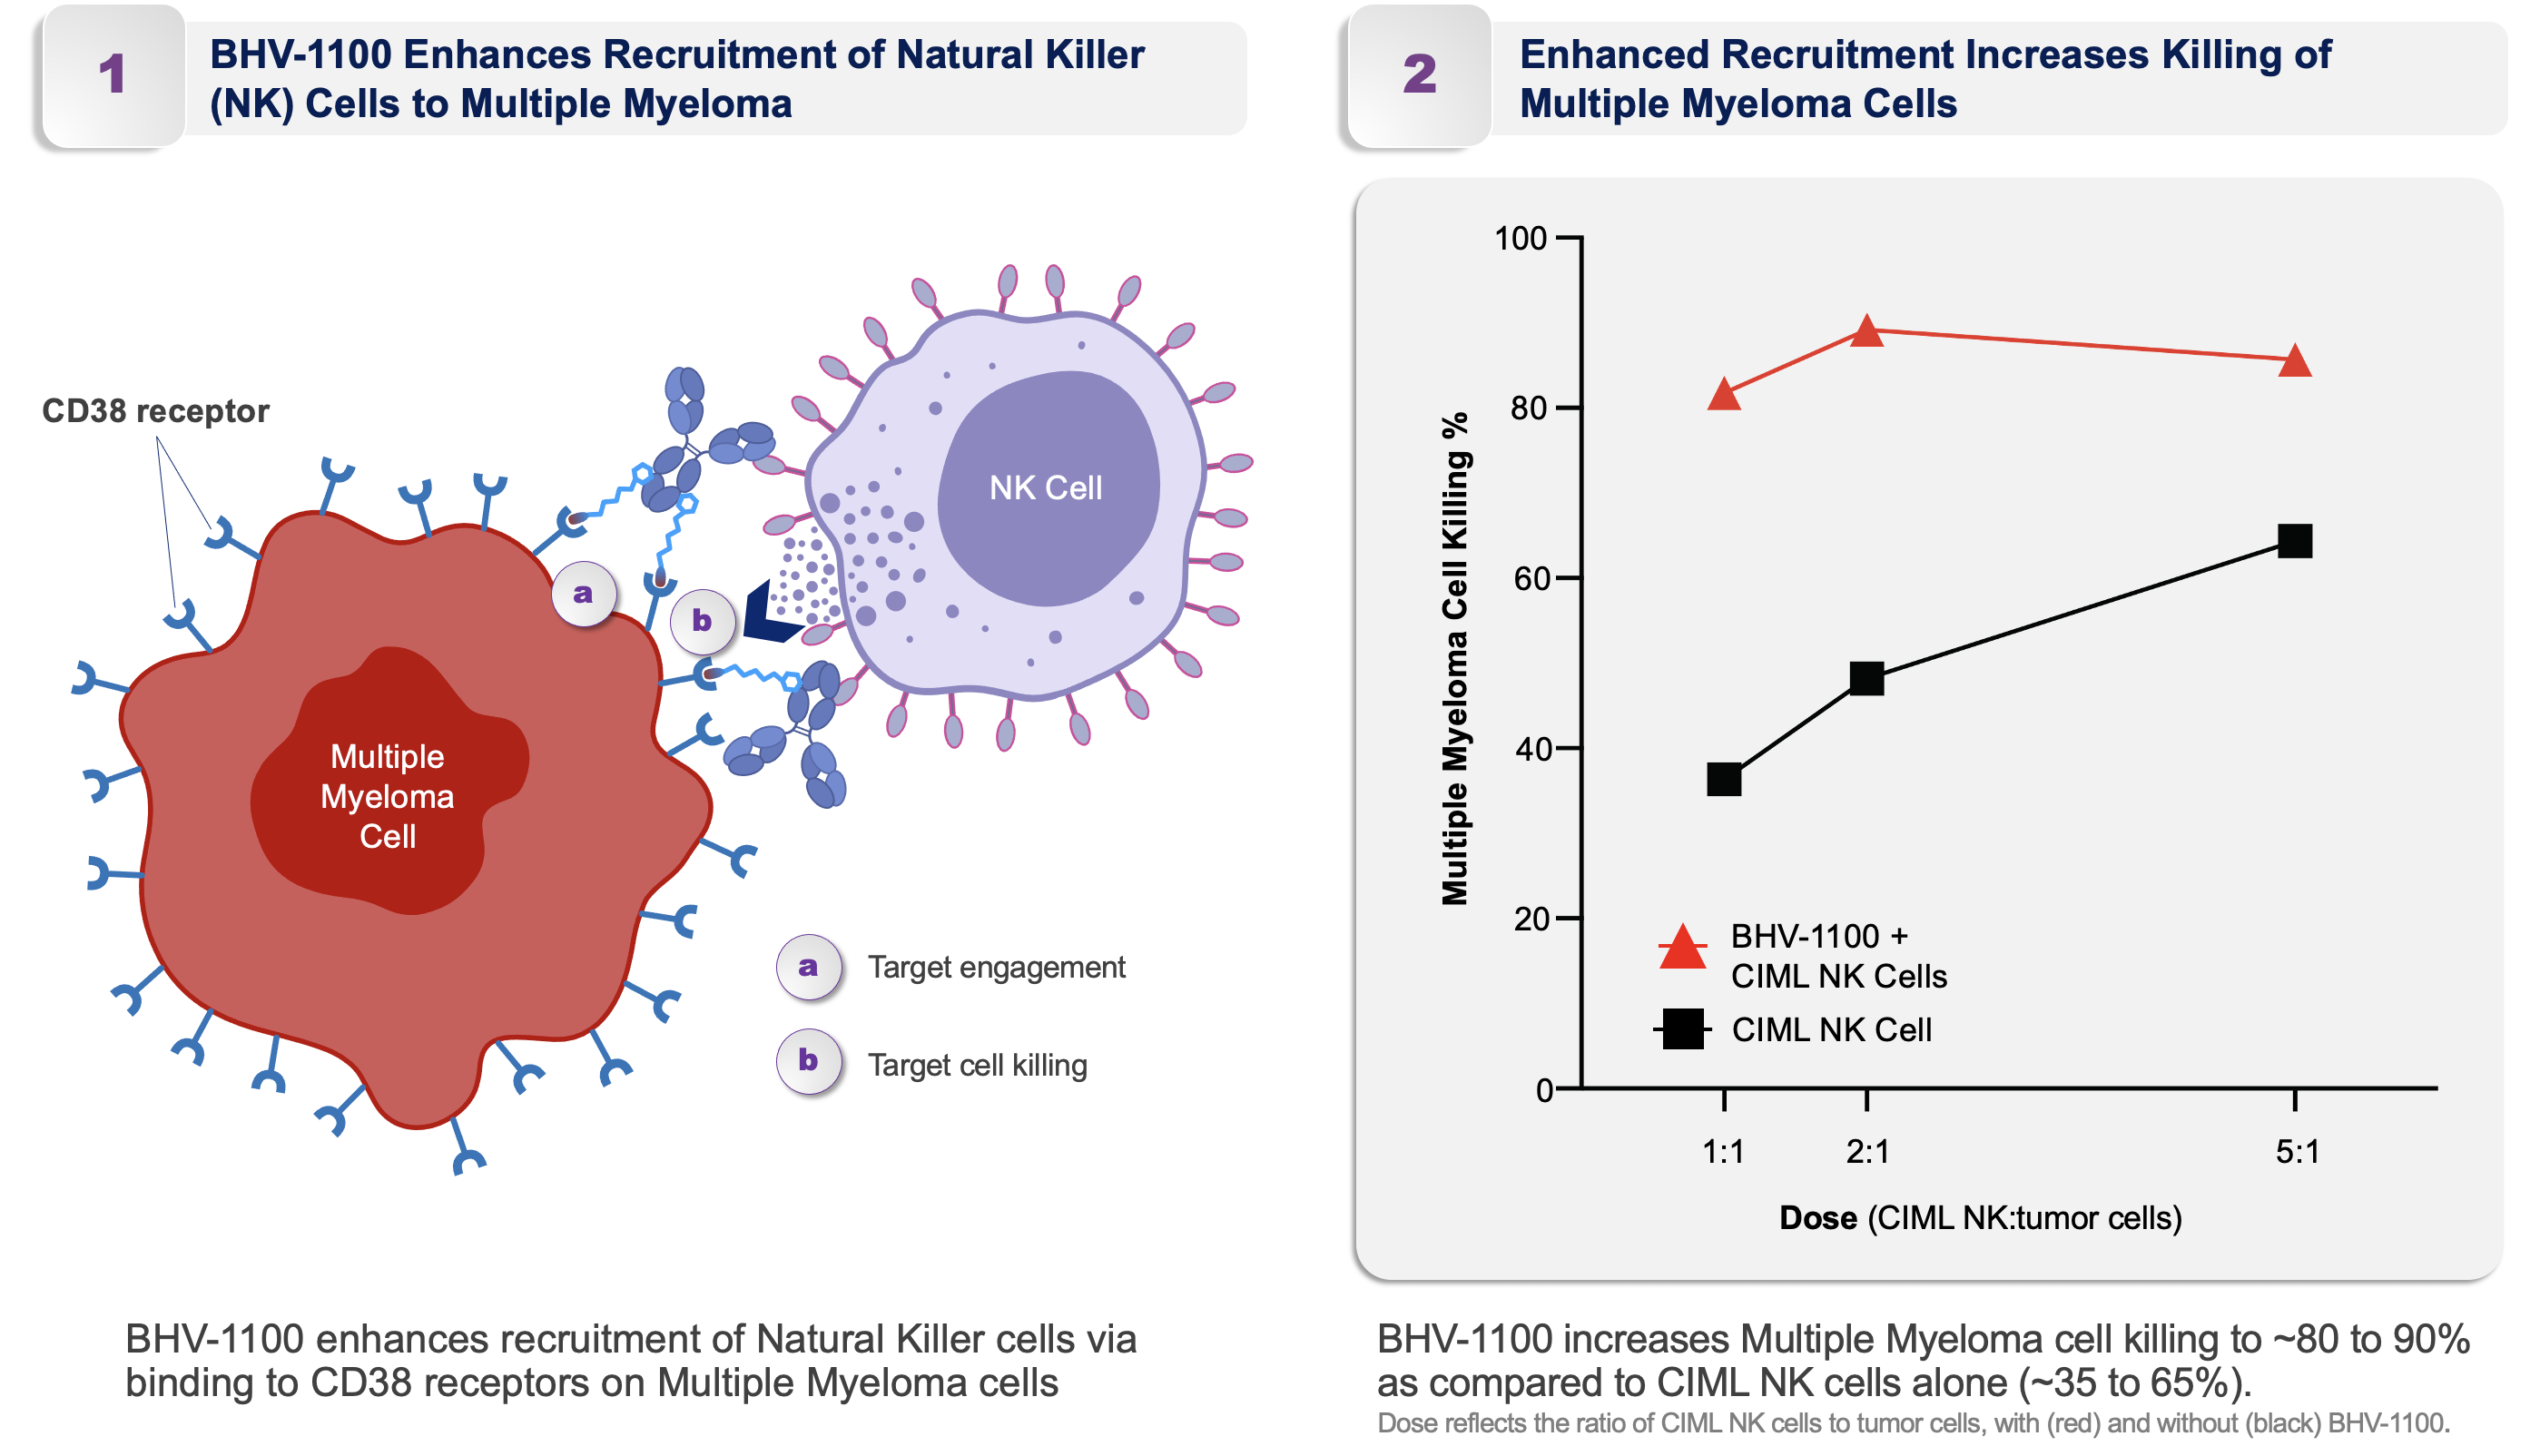 Bhiohaven BHV-1100 - Enhances recruitment of NK cells and increases killing of multiple myeloma cells